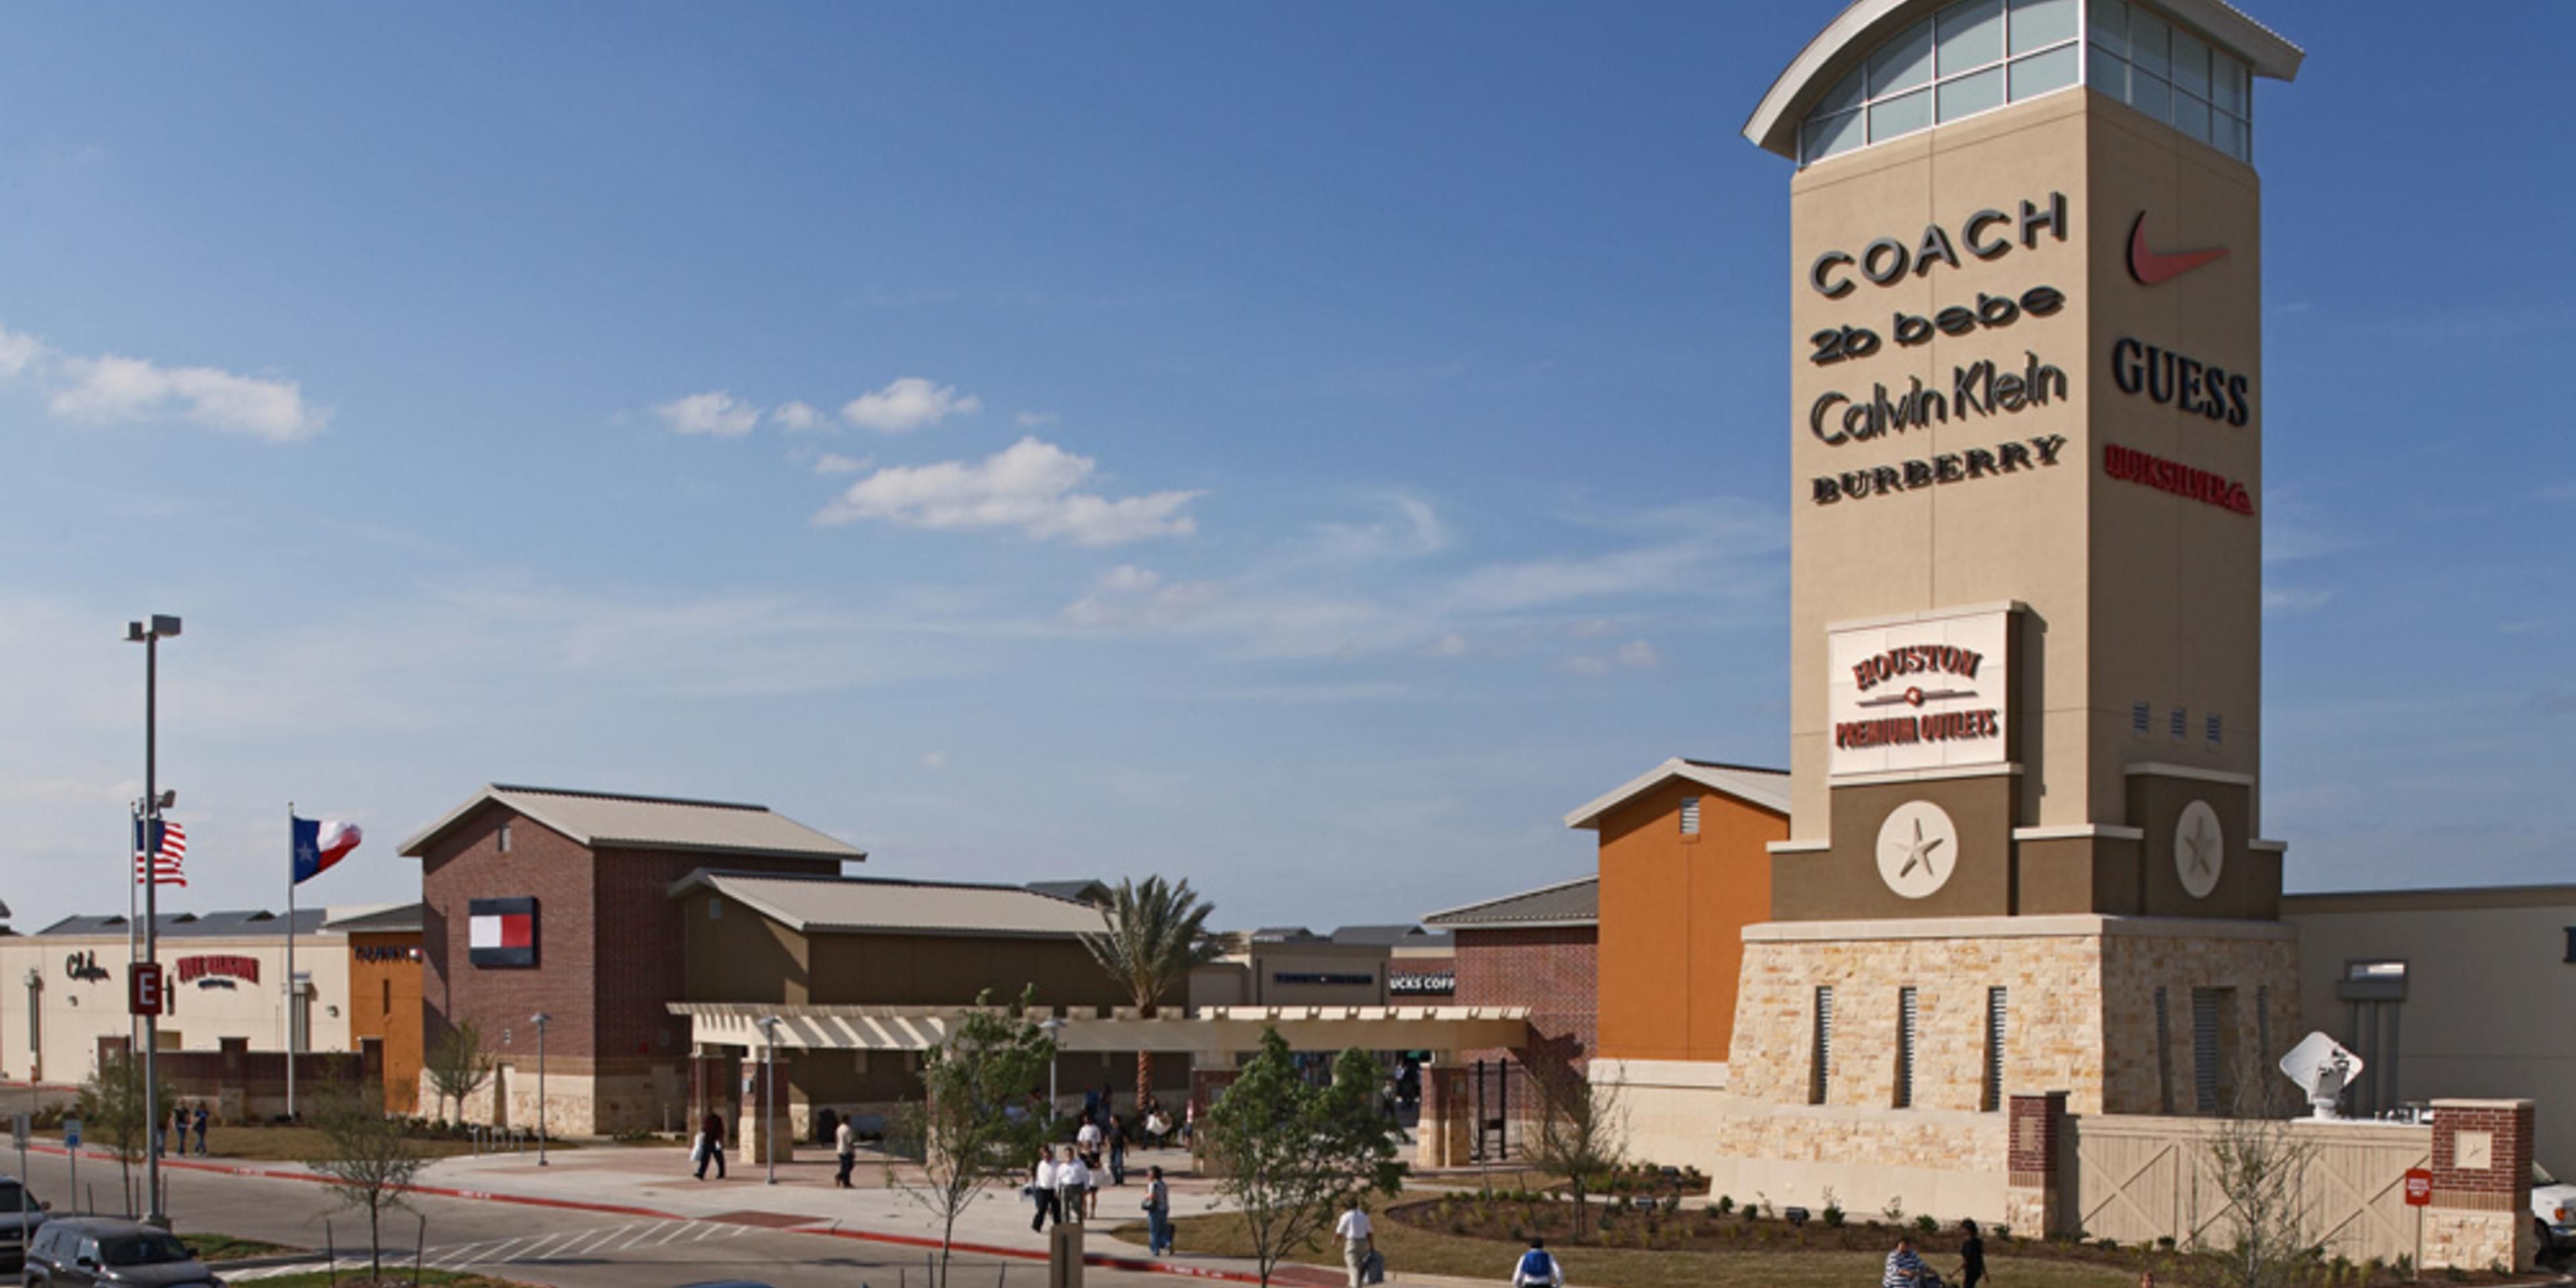 Love to shop? Our hotel sits adjacent to Houston Premium Outlets. All of the best shopping in Houston is just a few steps away when you stay with us! Call us today to reserve your shop and stay package, and get a $25 outlets gift card included with your stay! 